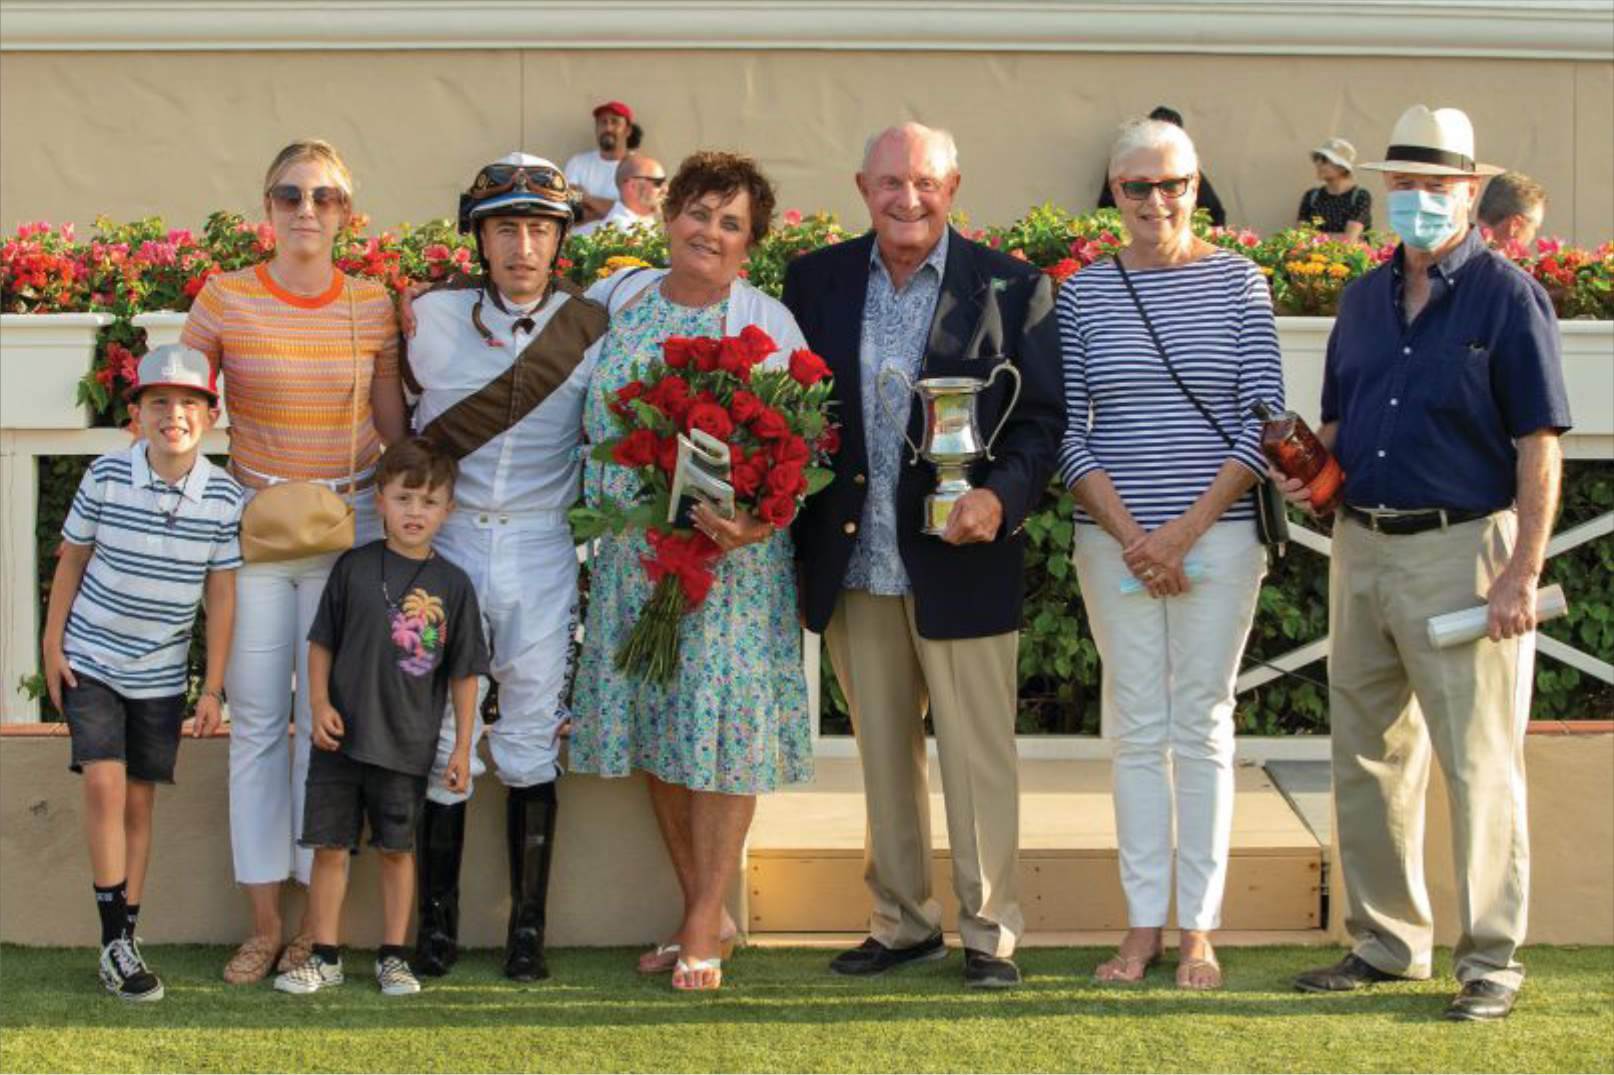 A family standing with jockey, wife holding a bouquet of roses, husband holding a trophy